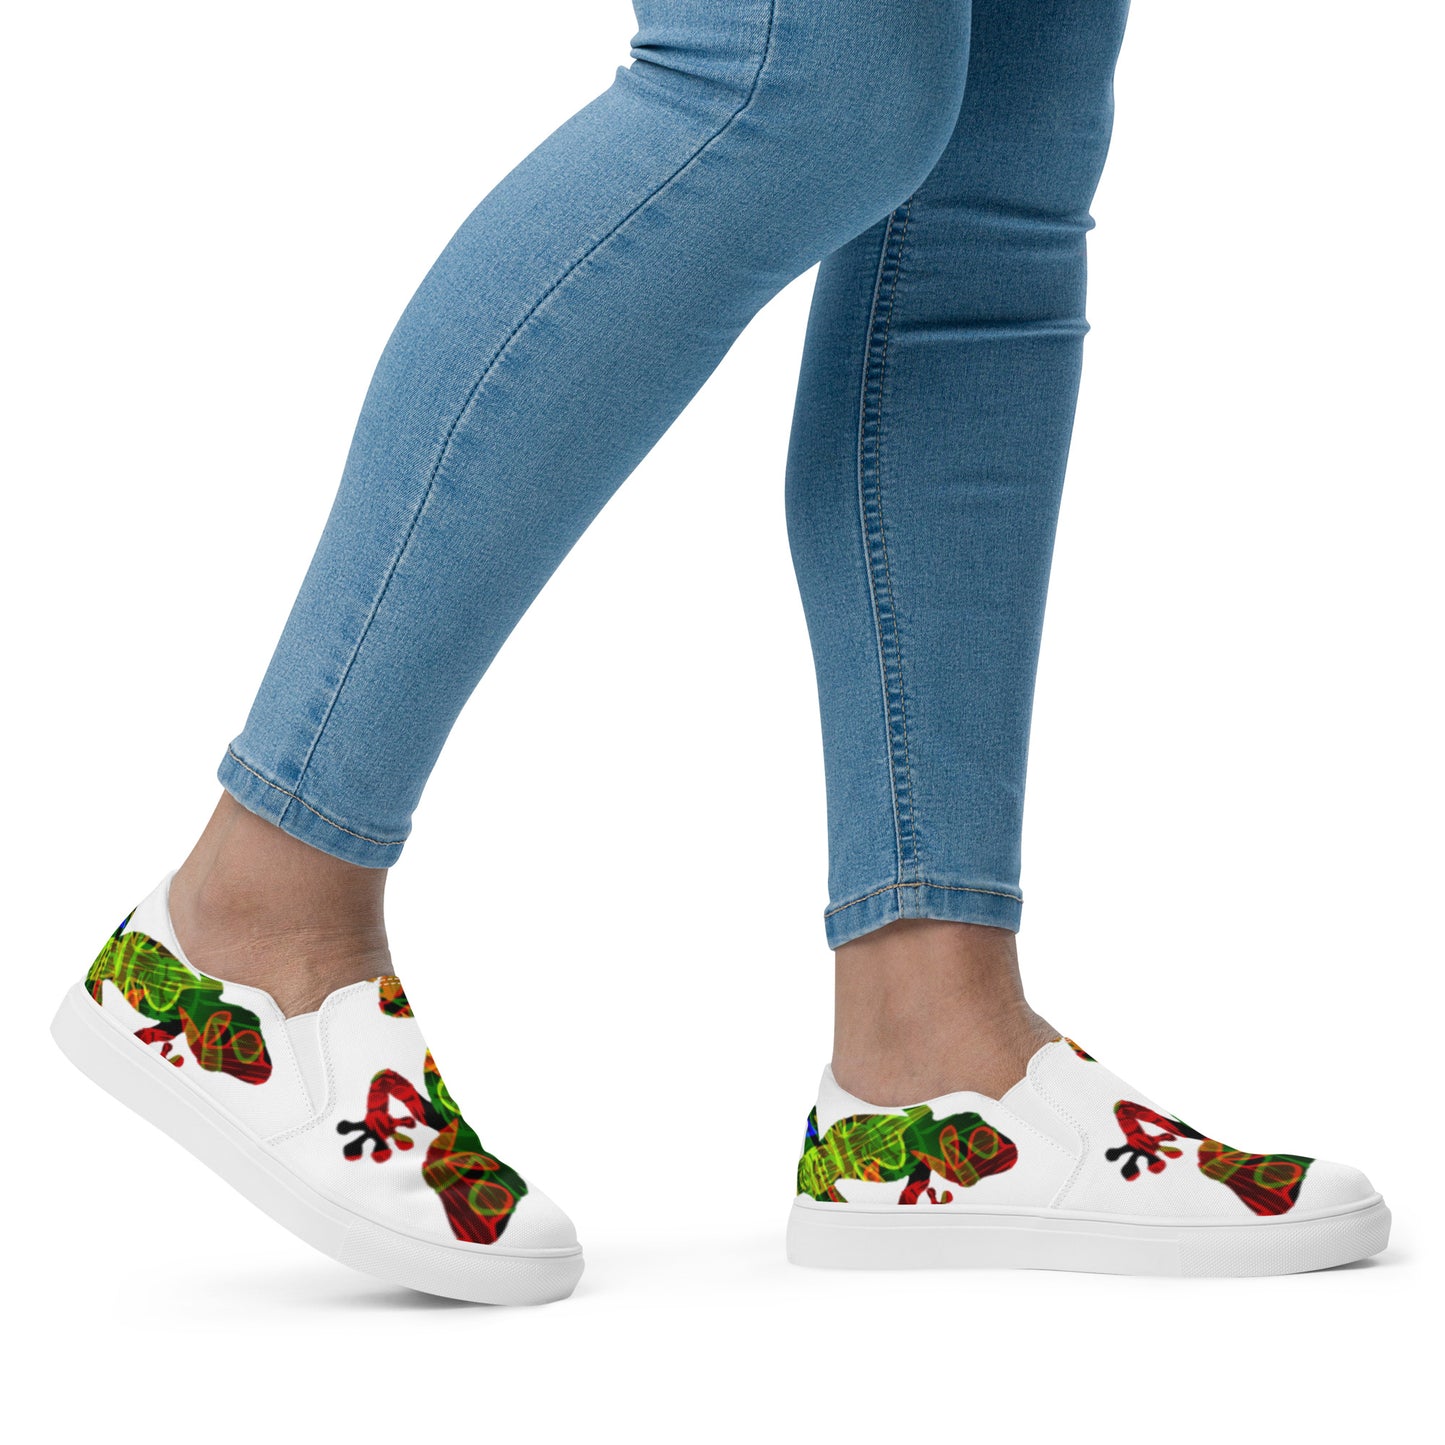 Tennis en toile sans lacets - Gecko by WillStyle